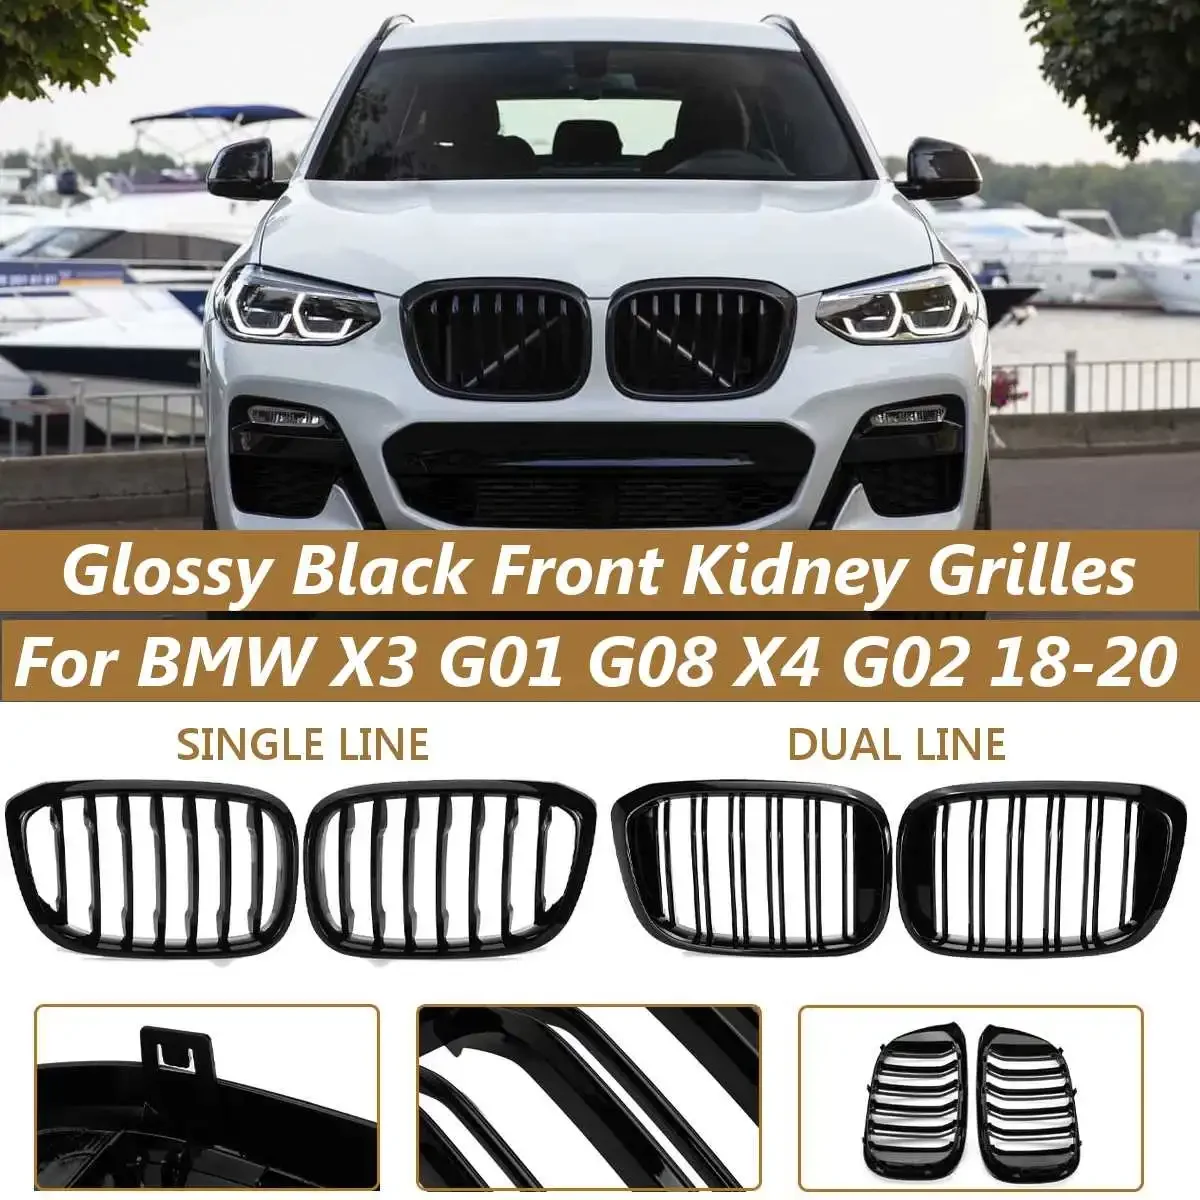 

2PCS Front Grille Kidney Grill Double Slat For BMW 3 4 X3 X4 G01 G02 G08 2018 2019 2020 Racing Grills Car Styling Accessories